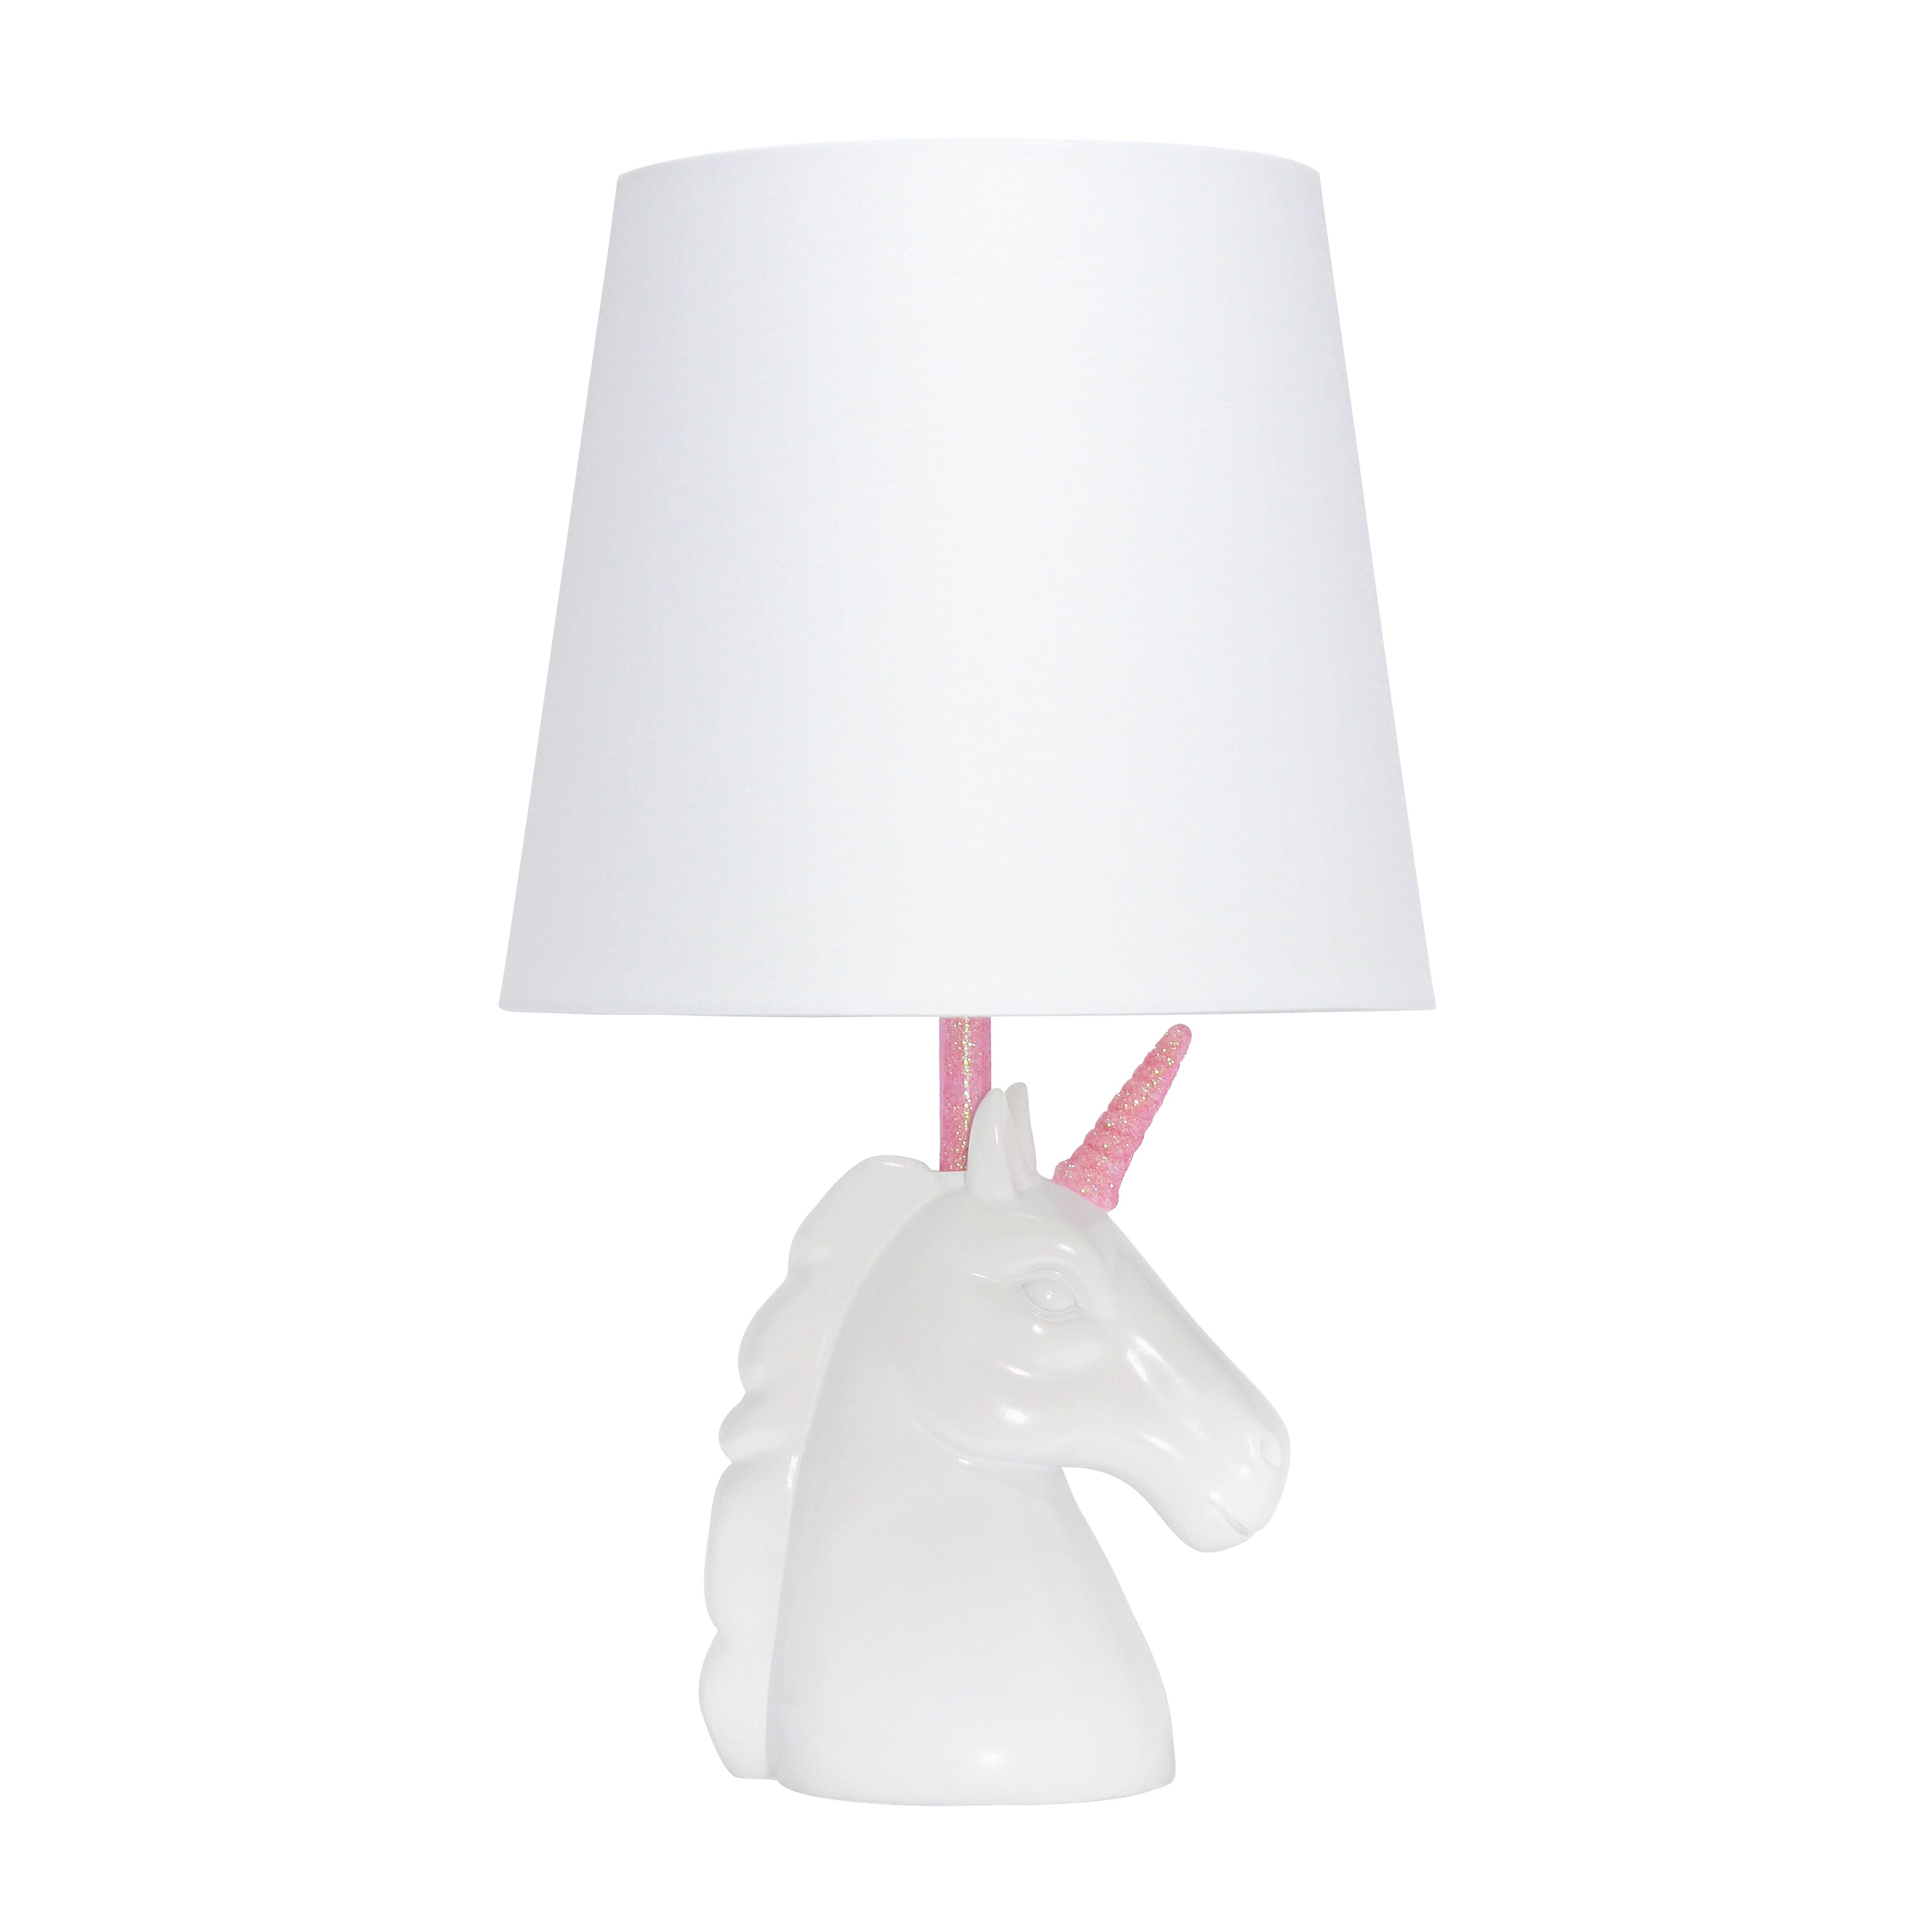 Pair Of White Ceramic Unicorn Table Lamps With Pink Lampshades LED Bulb Lighting 